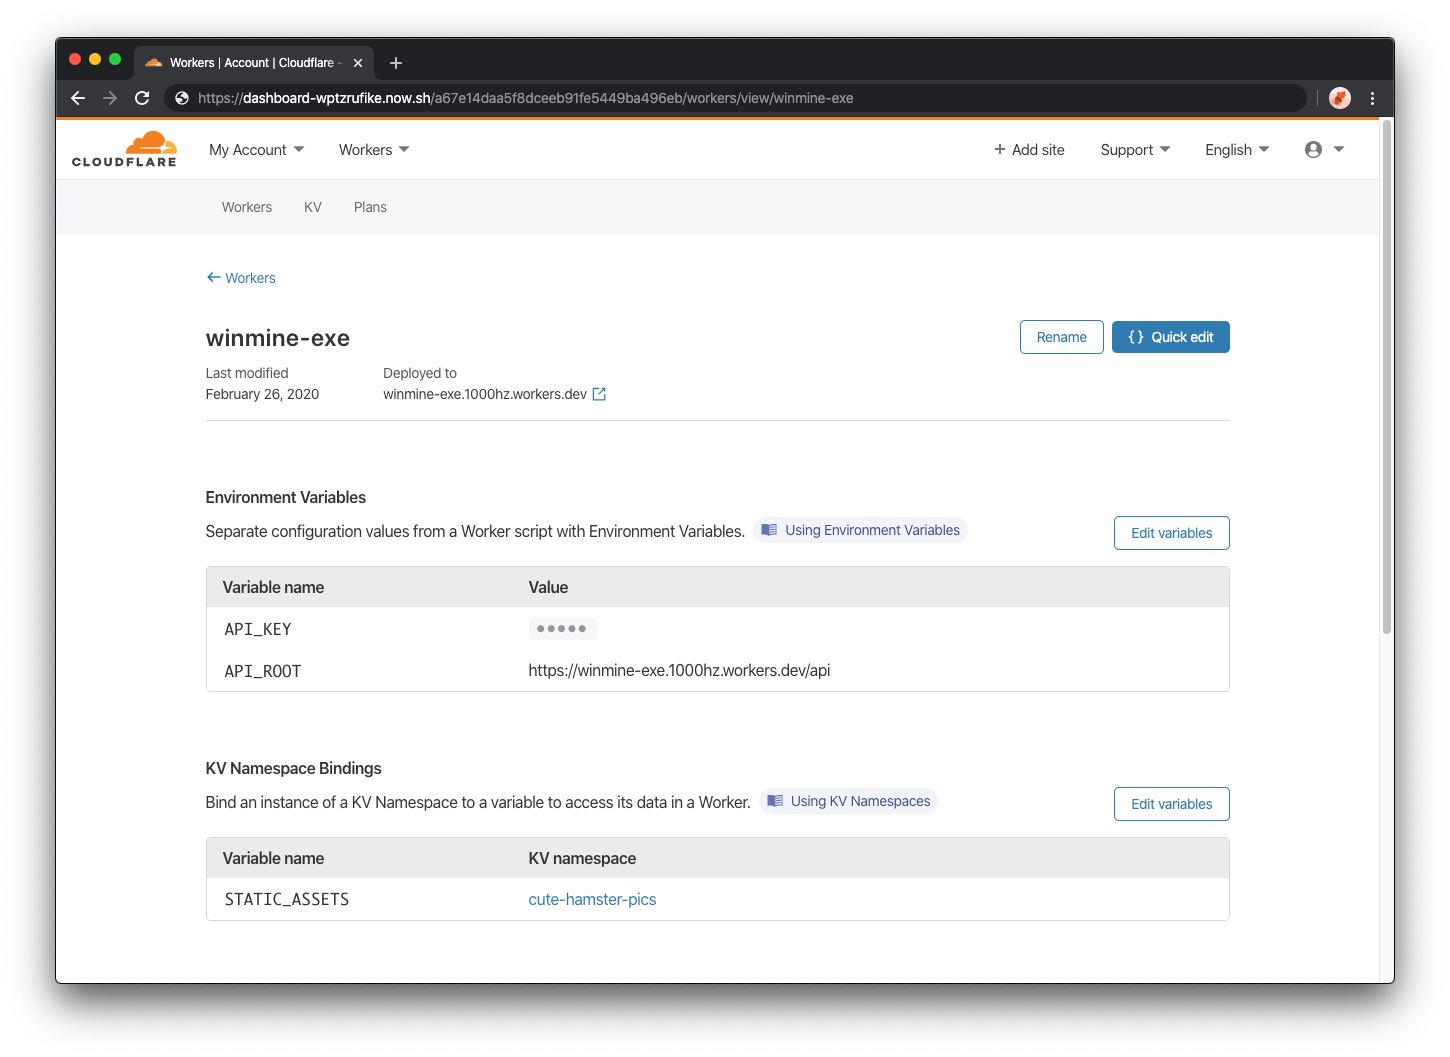 Introducing Secrets and Environment  Variables to Cloudflare Workers